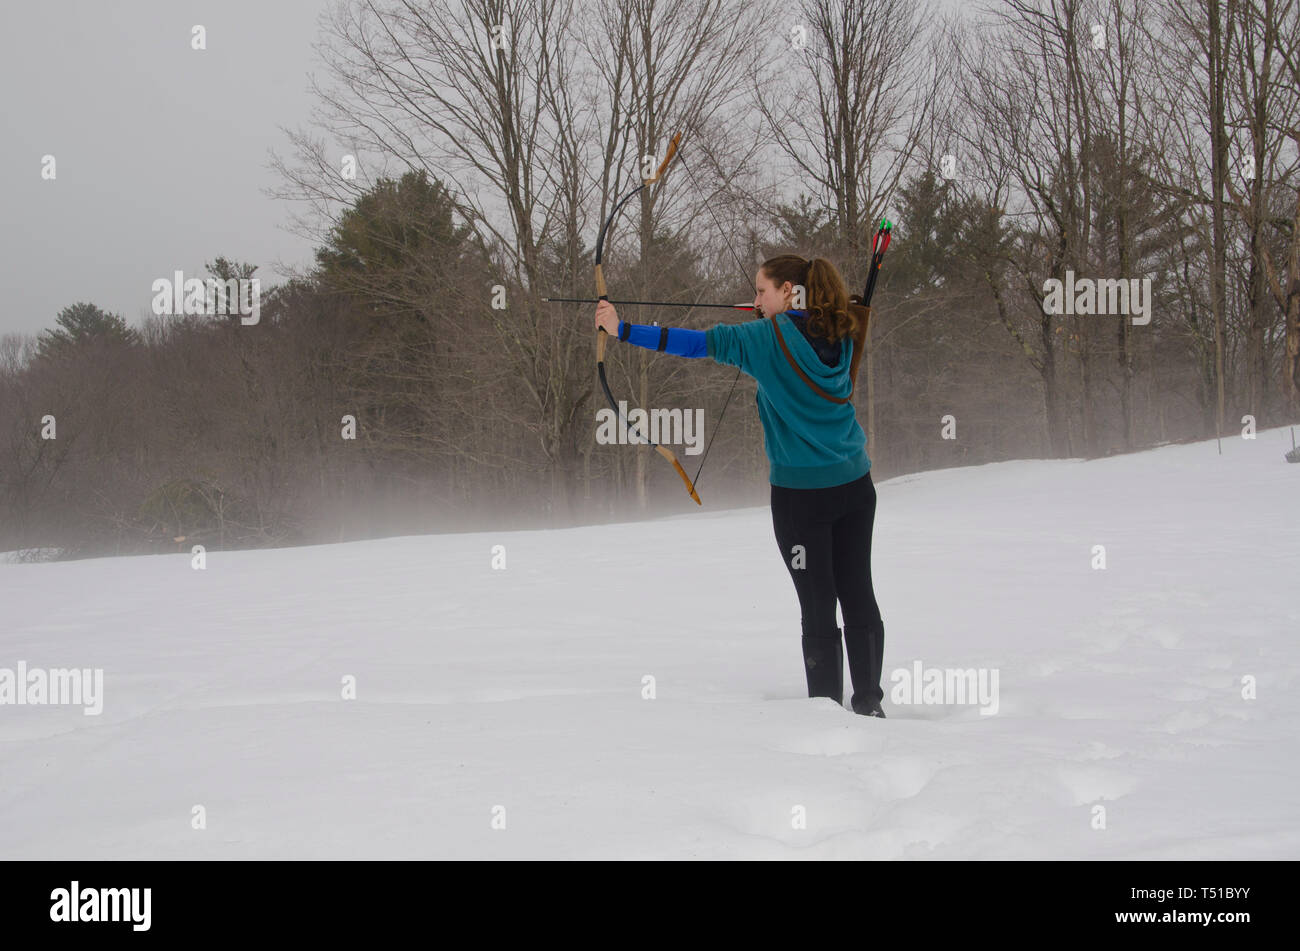 Woman shooting archery in snow, Maine, USA Stock Photo